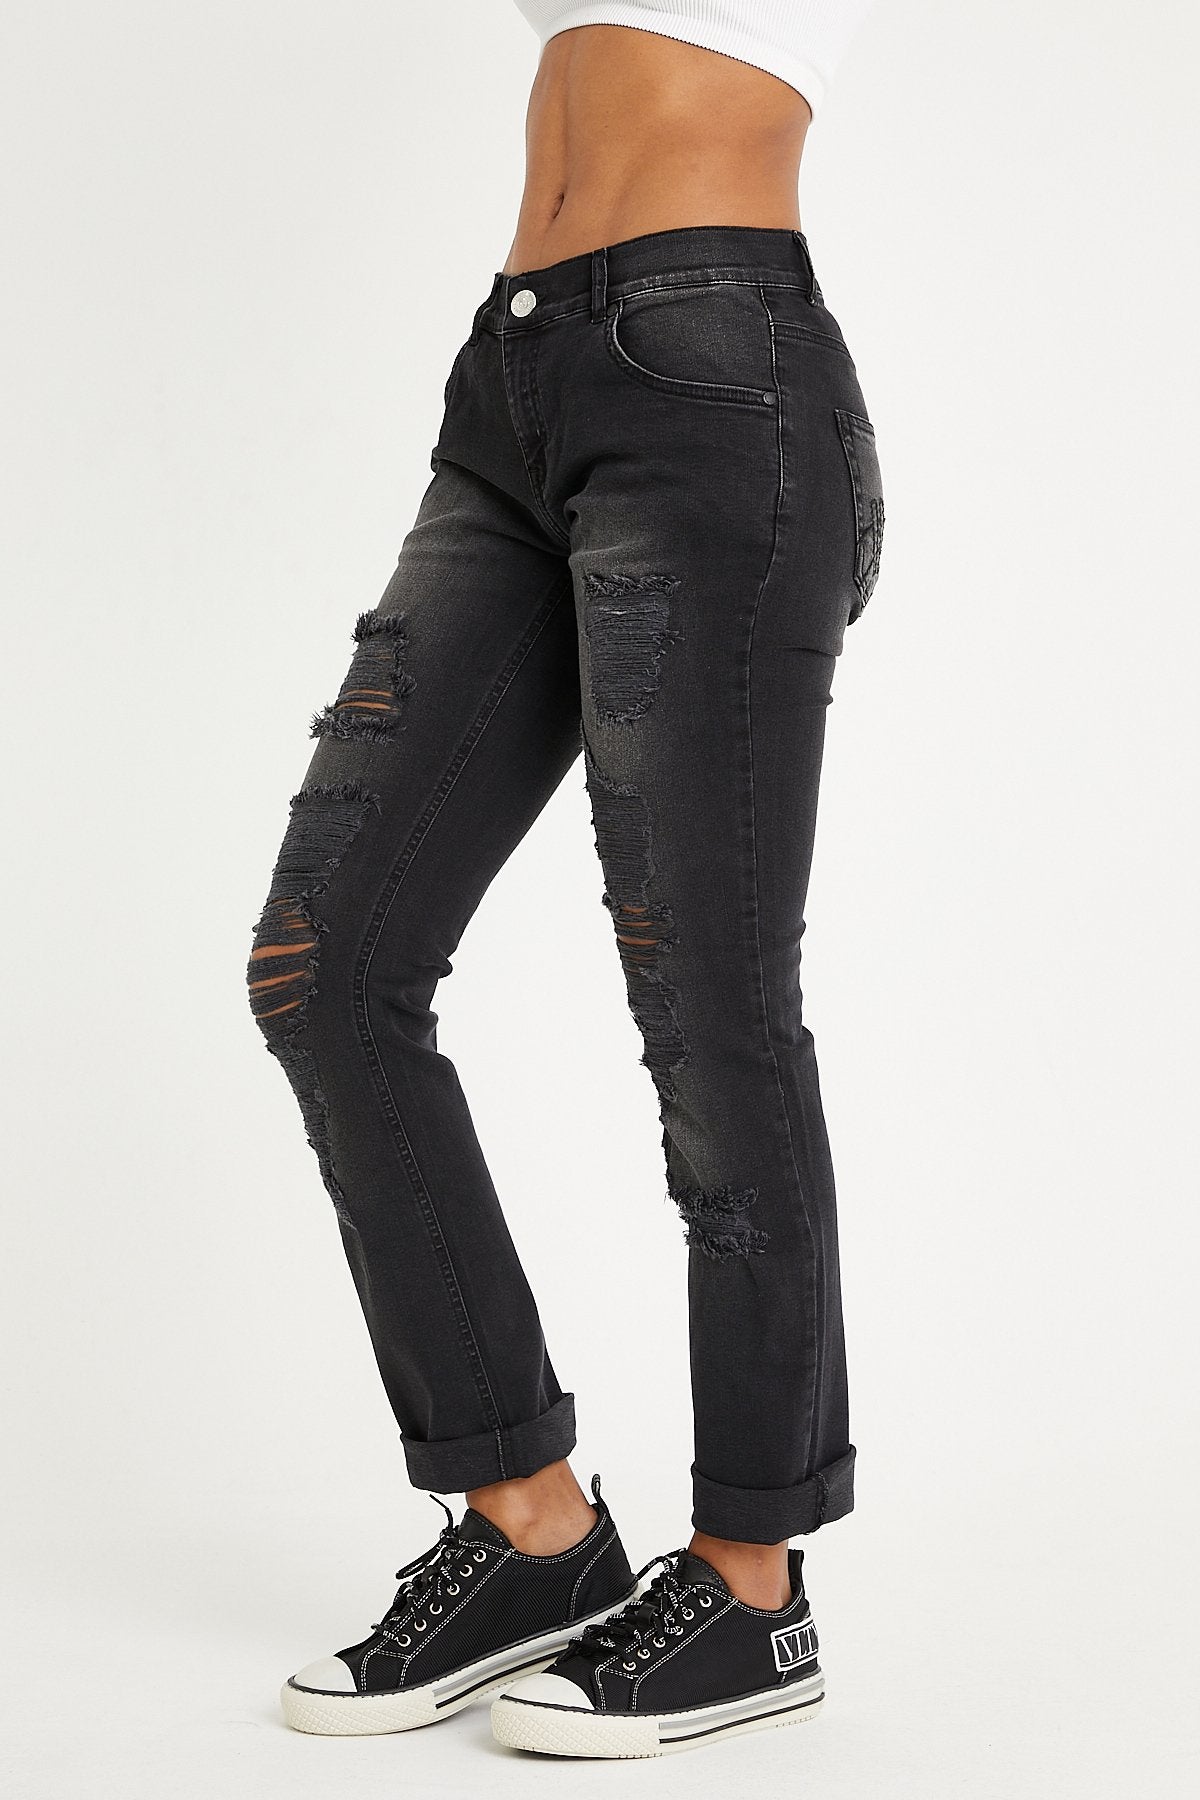 Ripped in Black Mid-Waist Jeans 4035